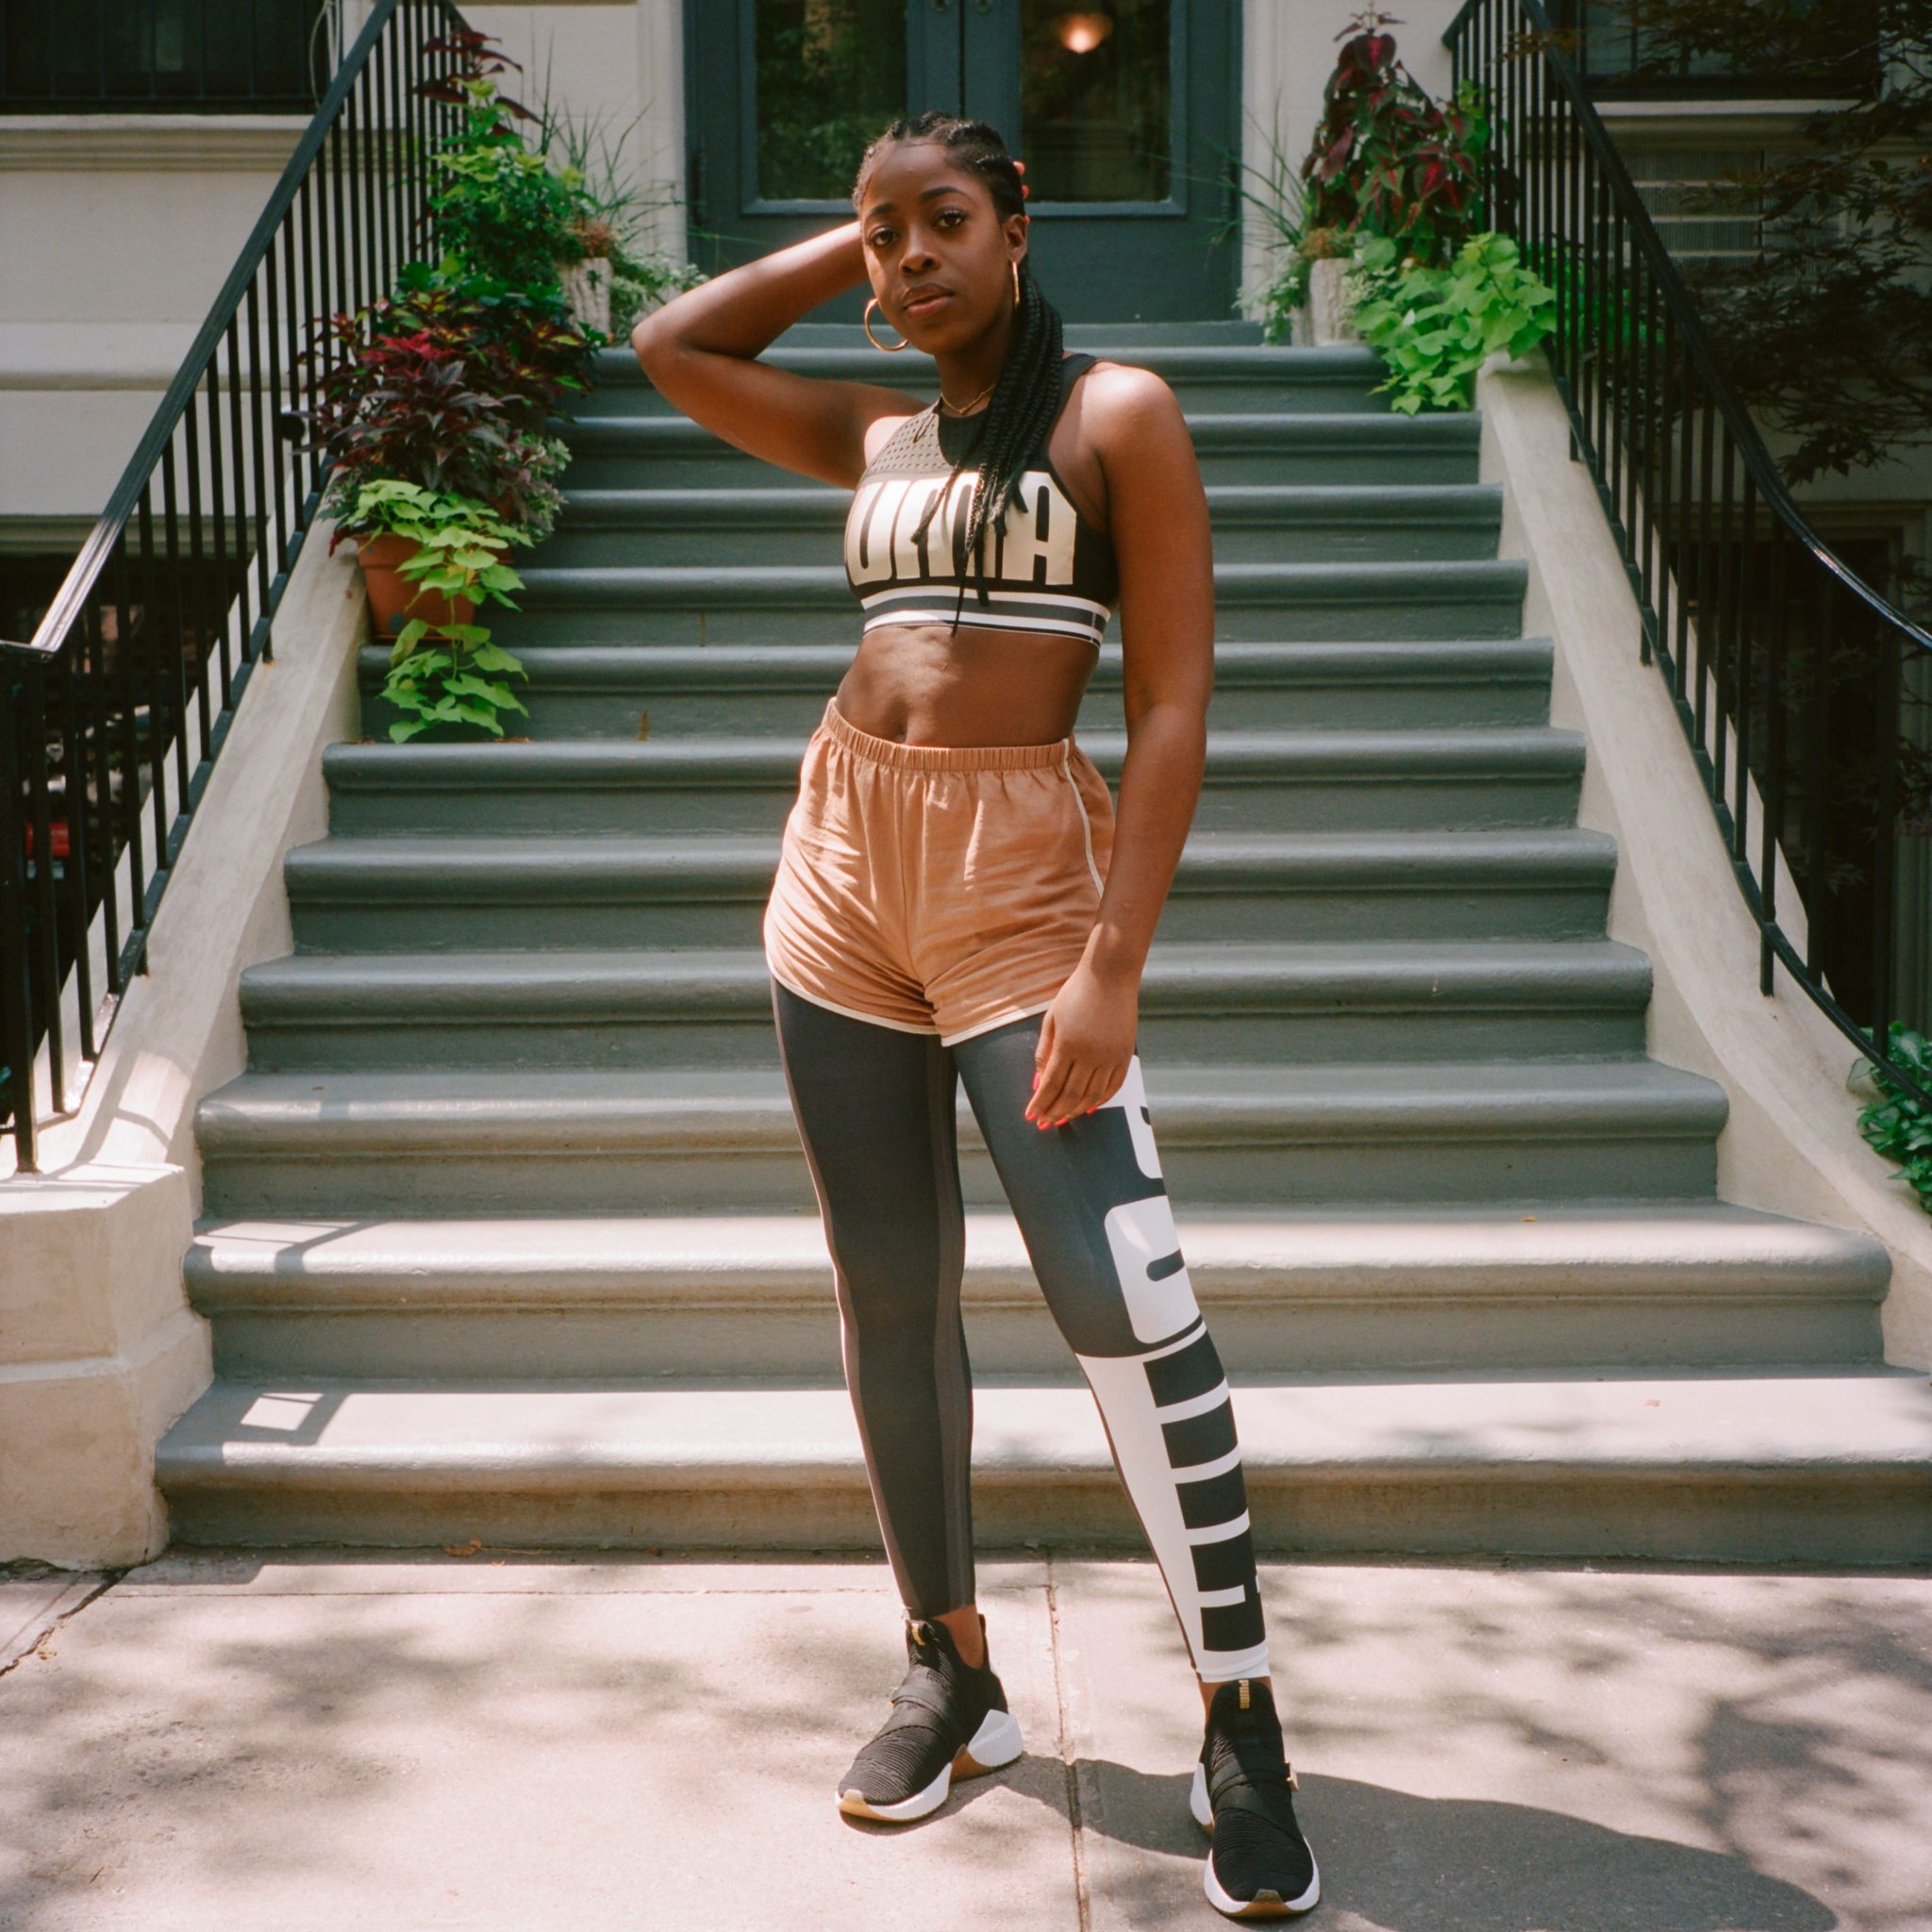 meet everystylishgirl, a collective creating diversity in the fashion industry